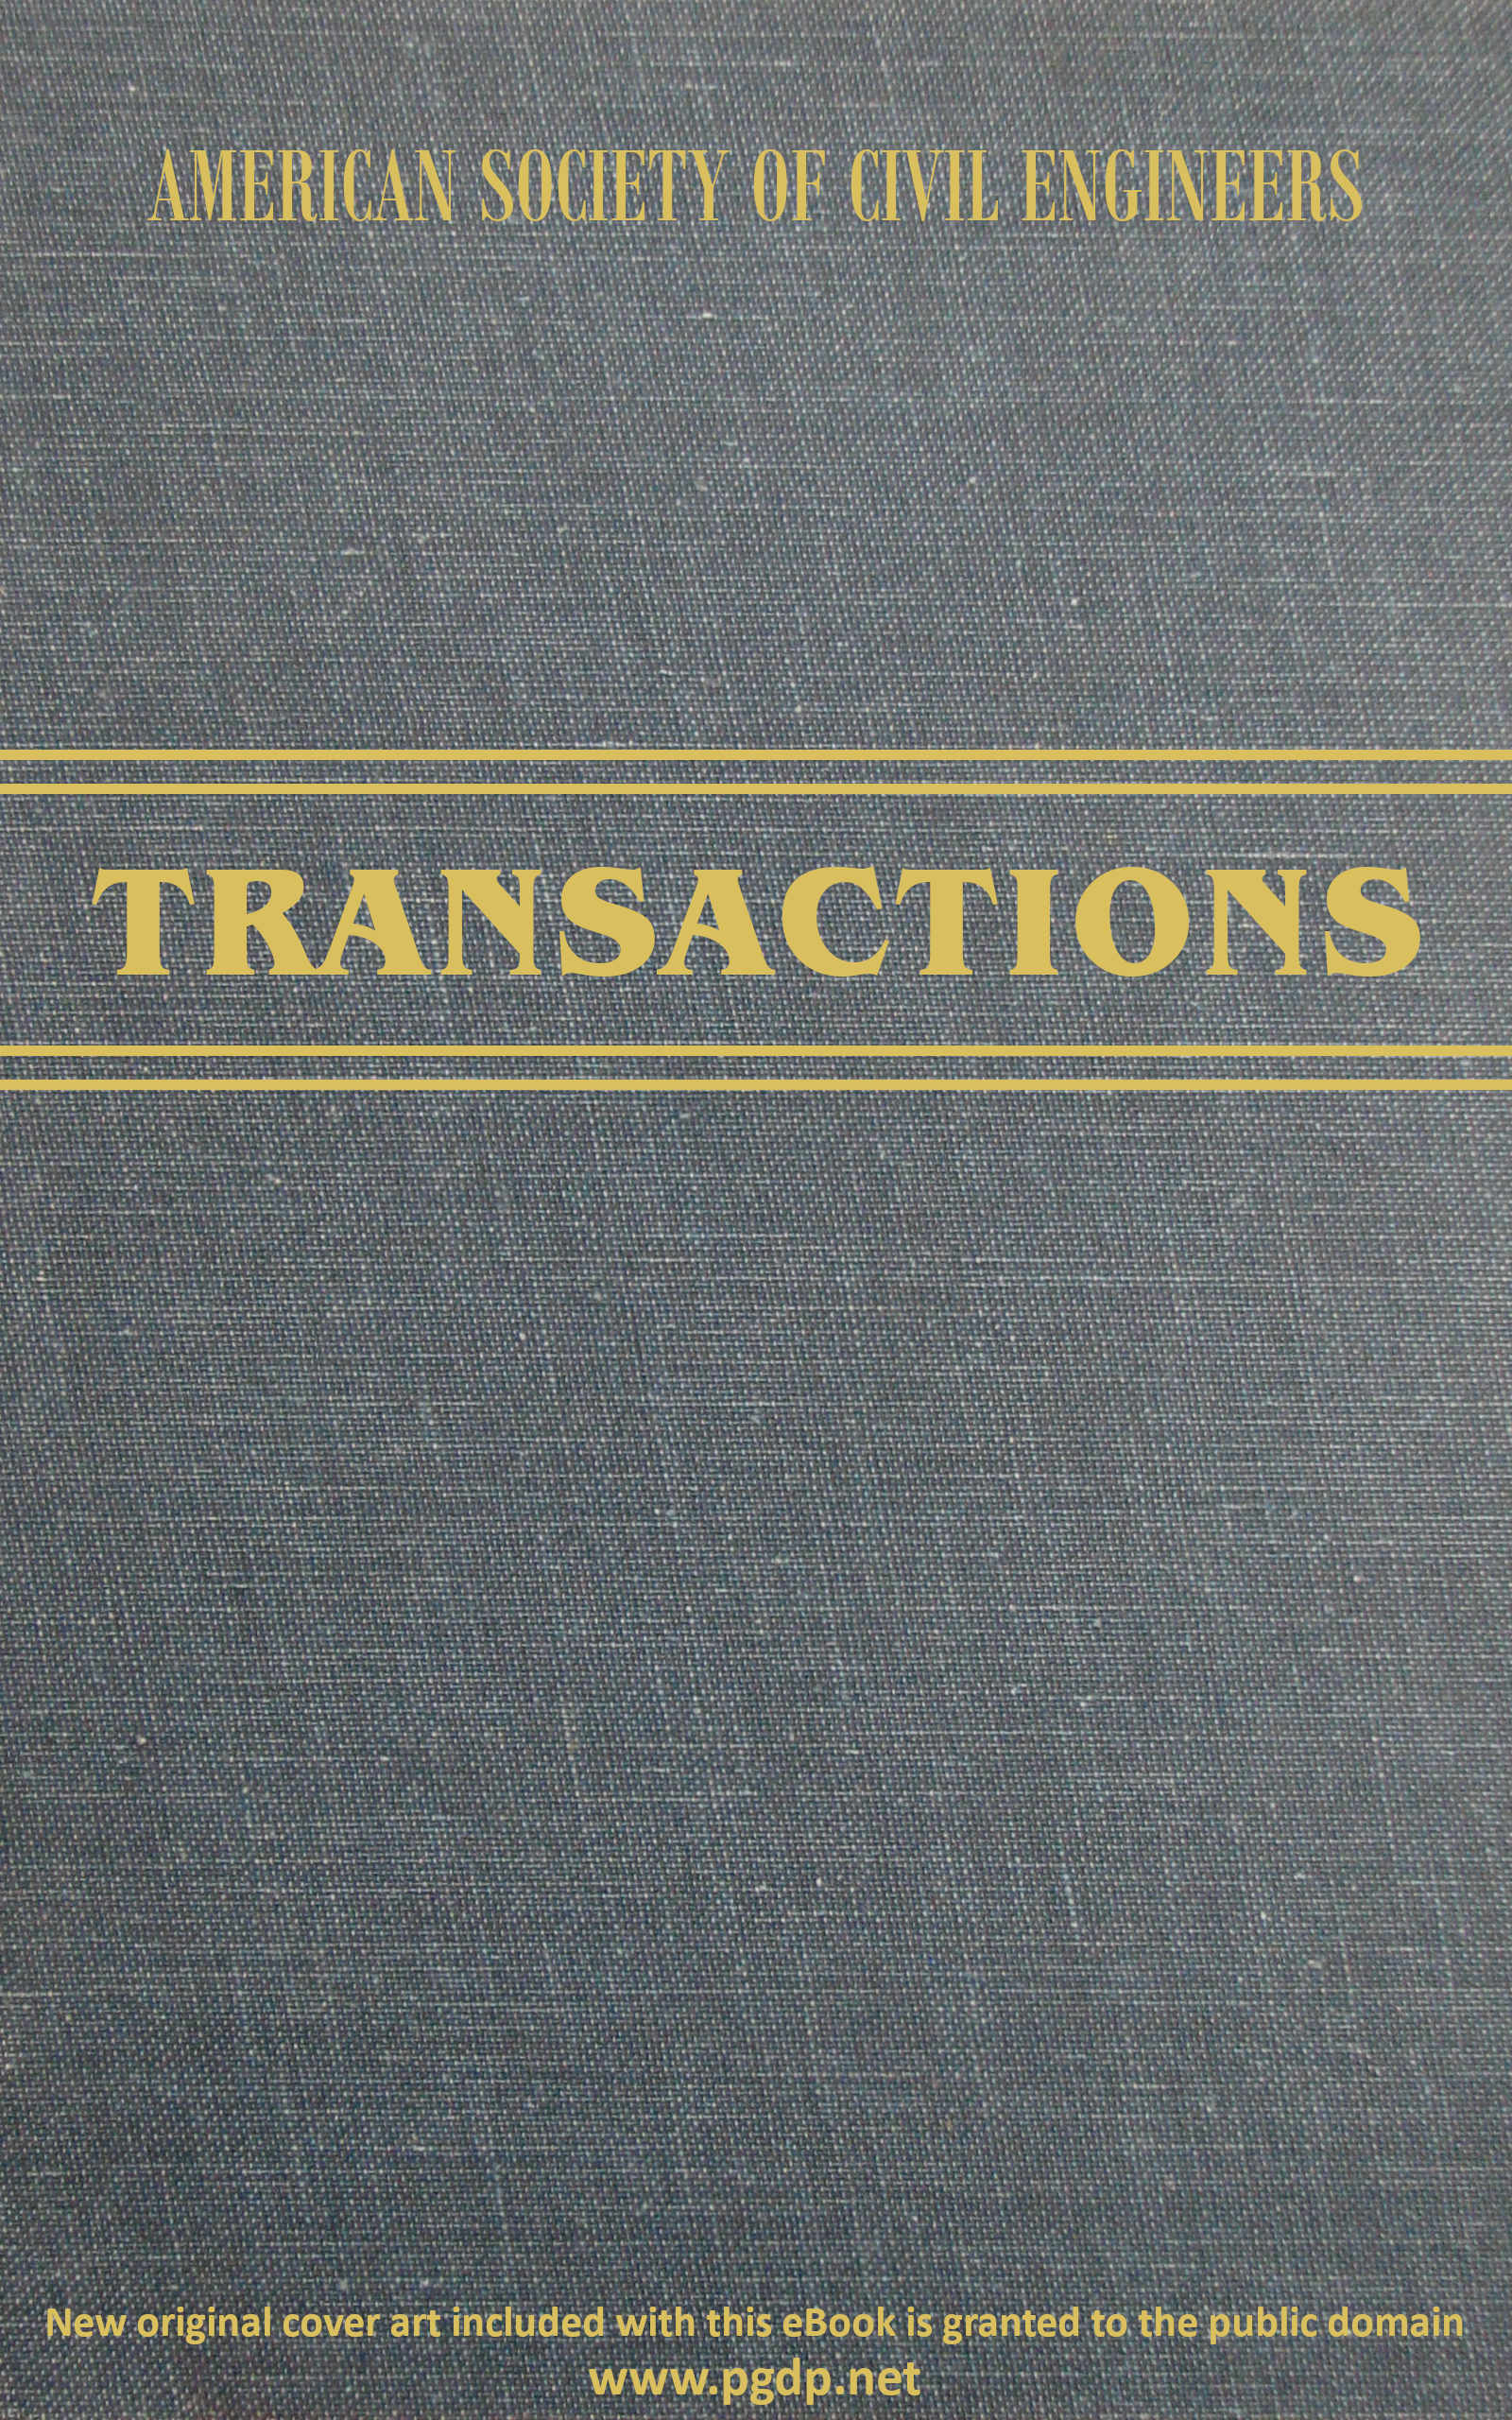 Transactions of the American Society of Civil Engineers, vol. LXXII, June, 1911